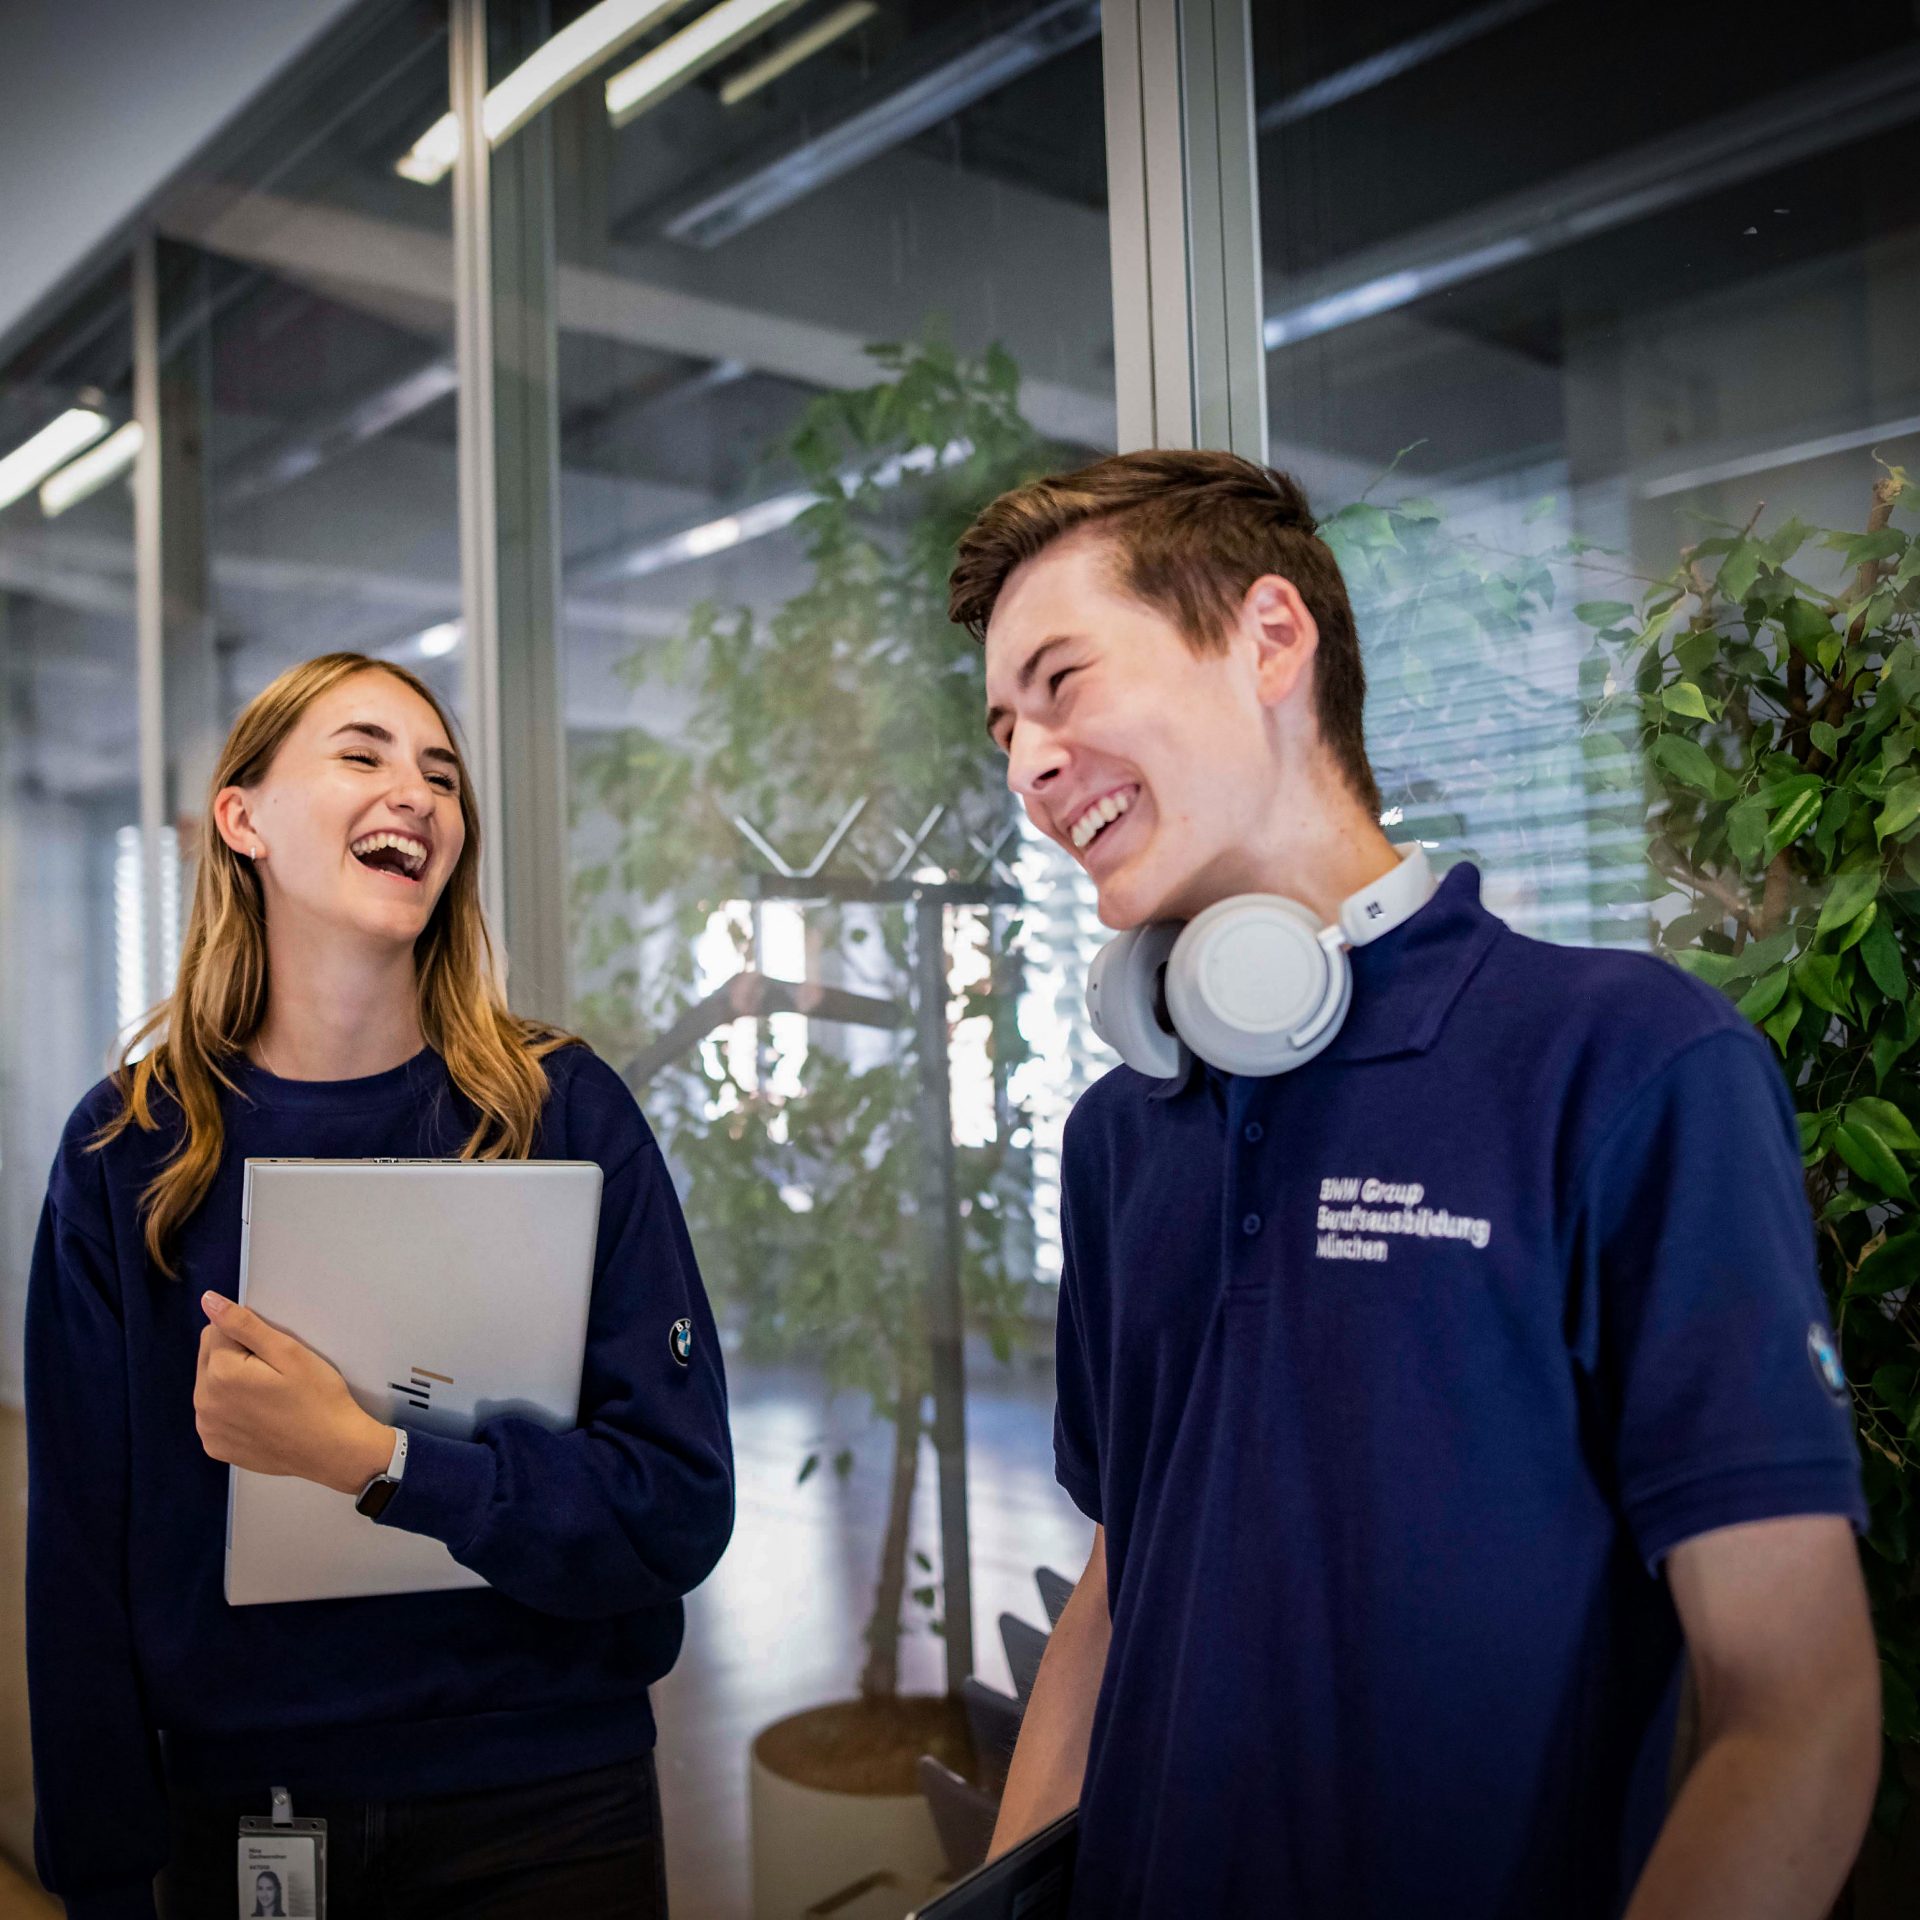 The picture shows two smiling apprentices in the office.